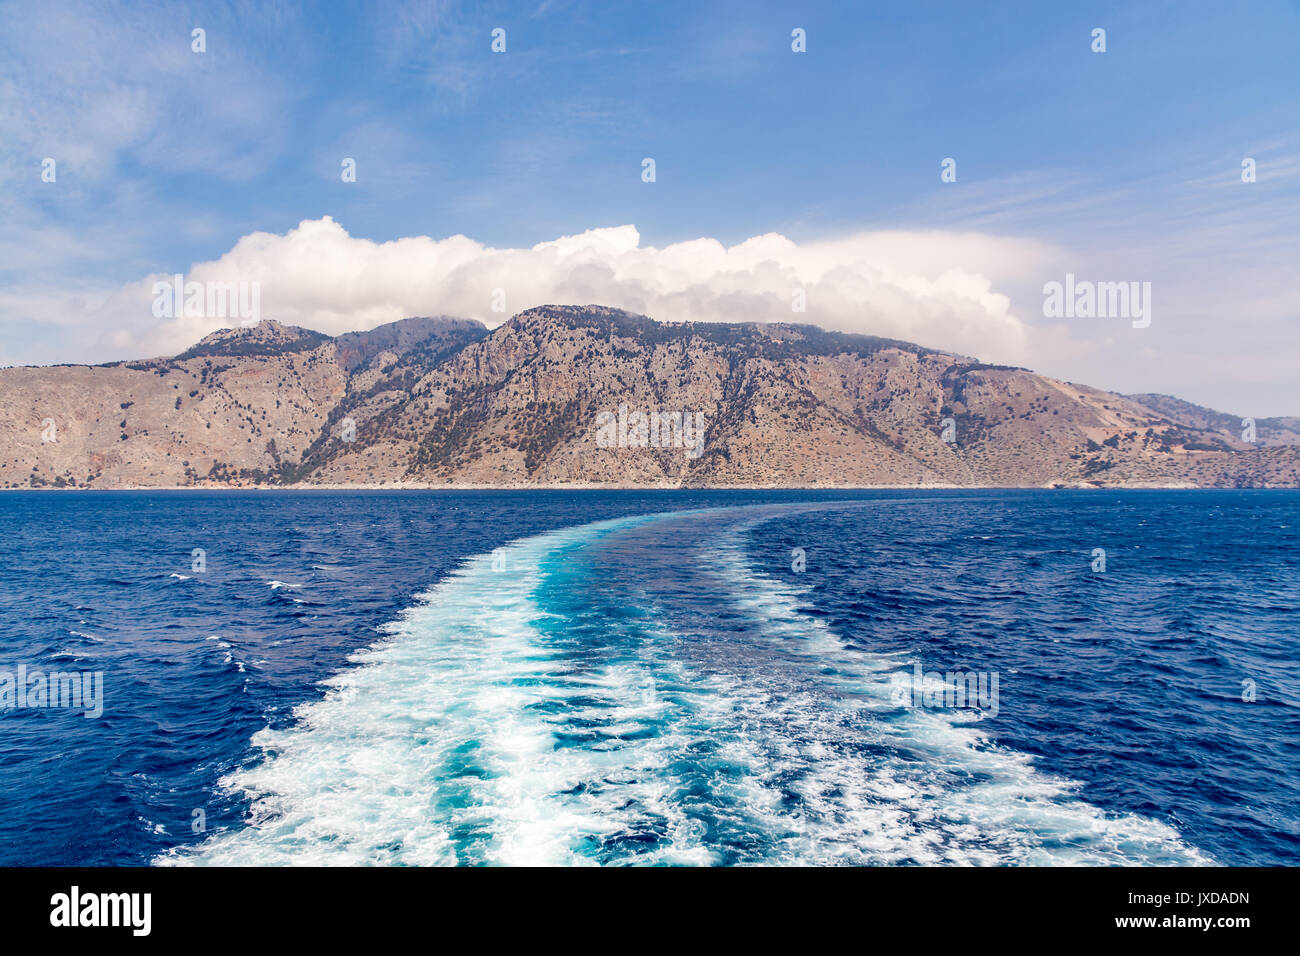 Wake on the surface of a sea and hilly island in the background, landscape Stock Photo